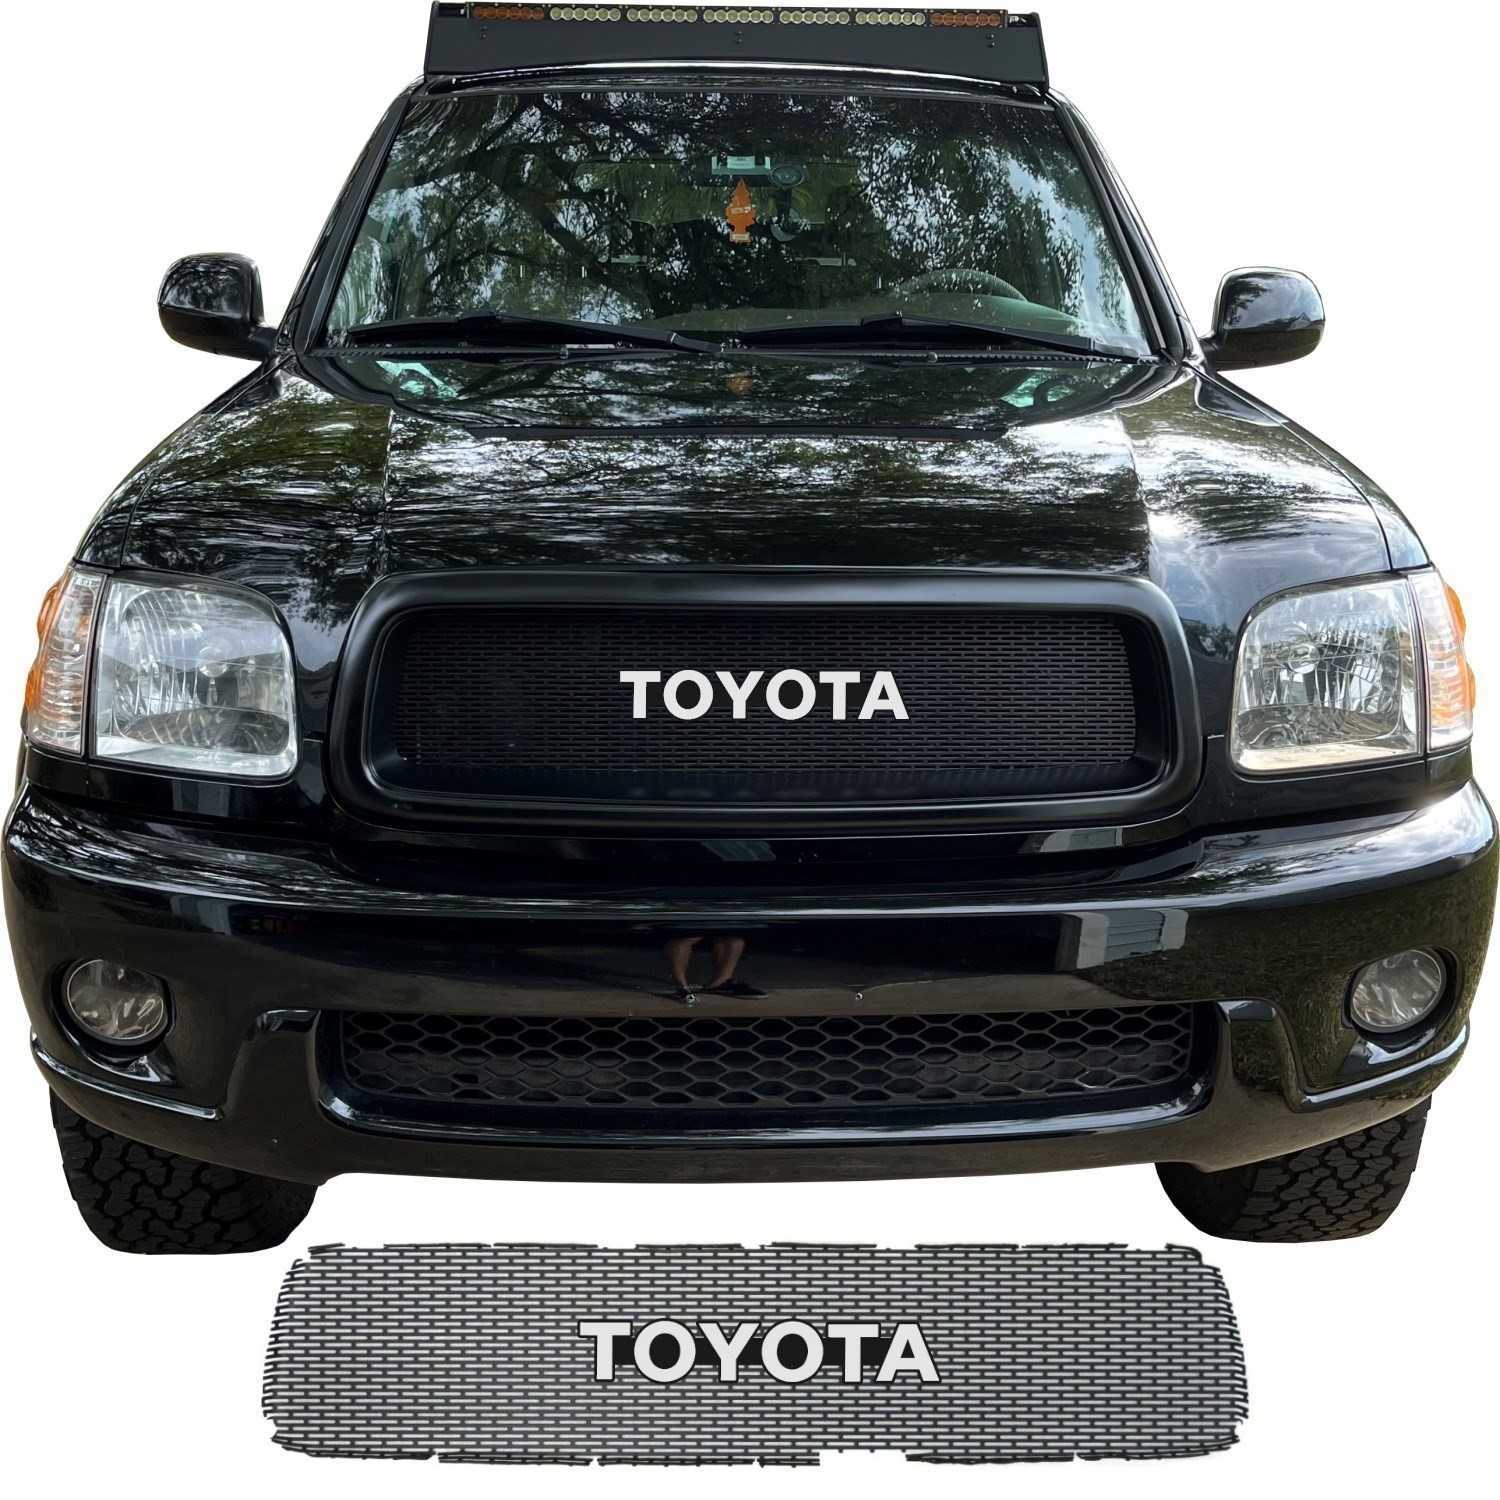 2001 - 2004 Toyota Sequoia Grill Mesh with Toyota Emblem #1